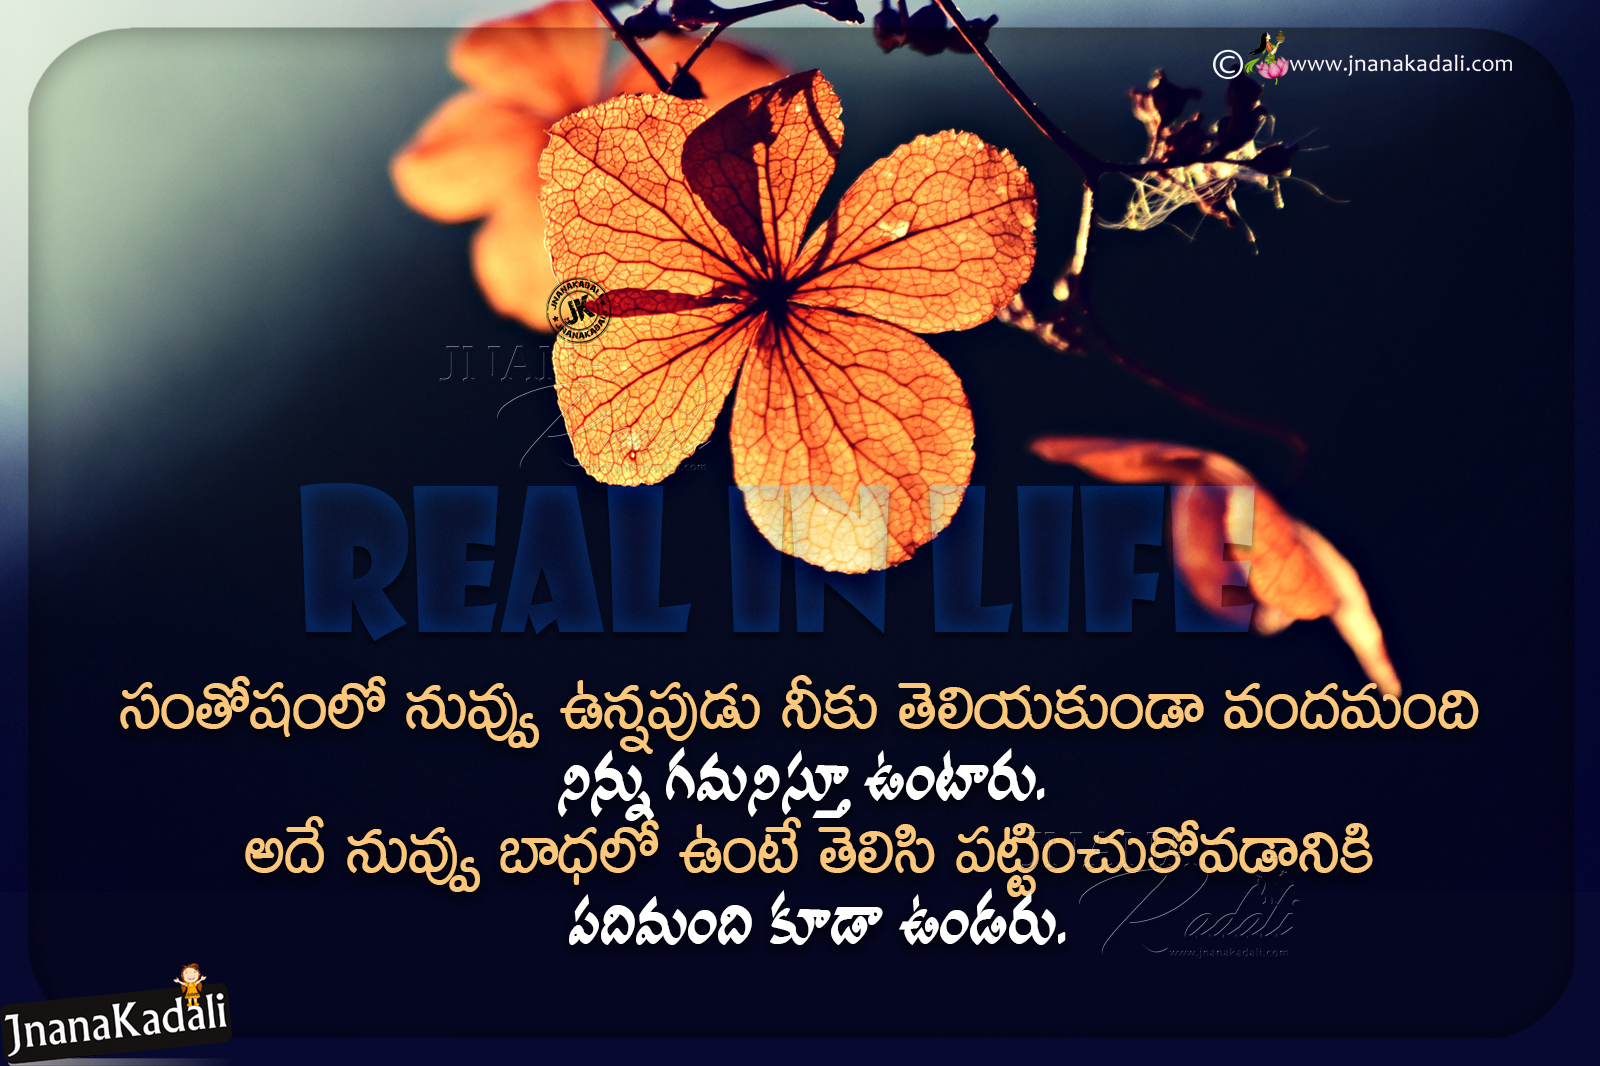 Real Life Quotes in Telugu-Words That Change Your Life in A Good ...